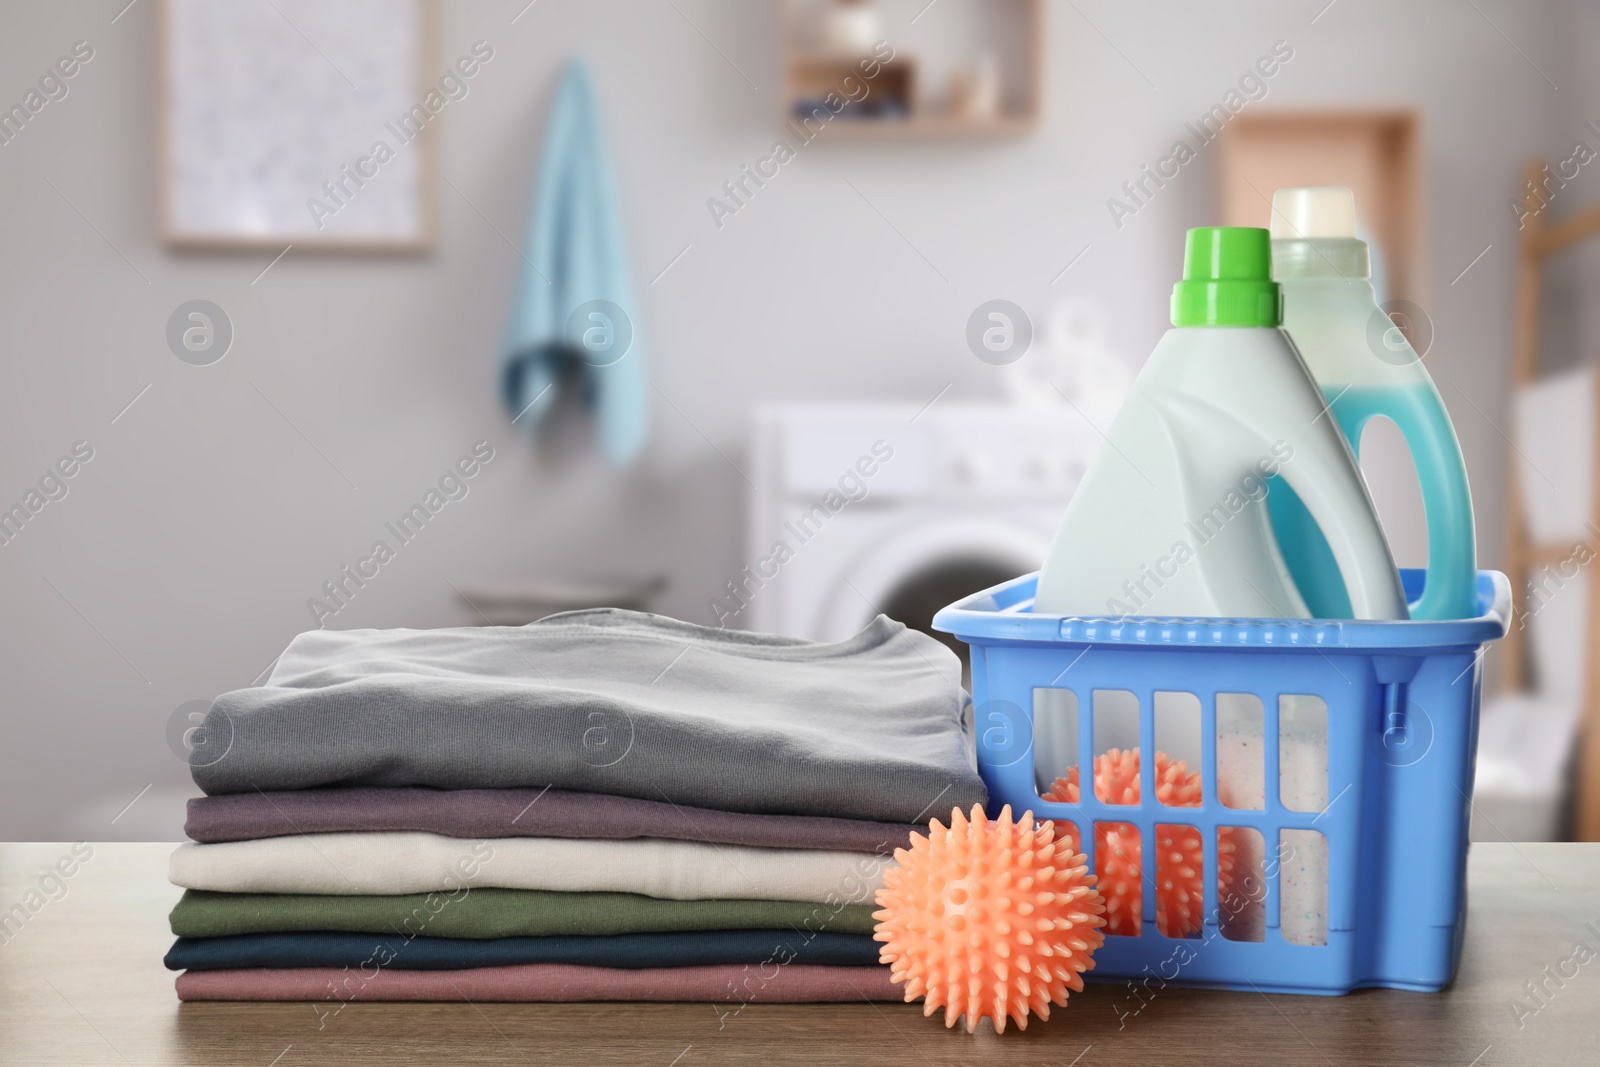 Image of Dryer balls, detergents and stacked clean clothes on wooden table in laundry room